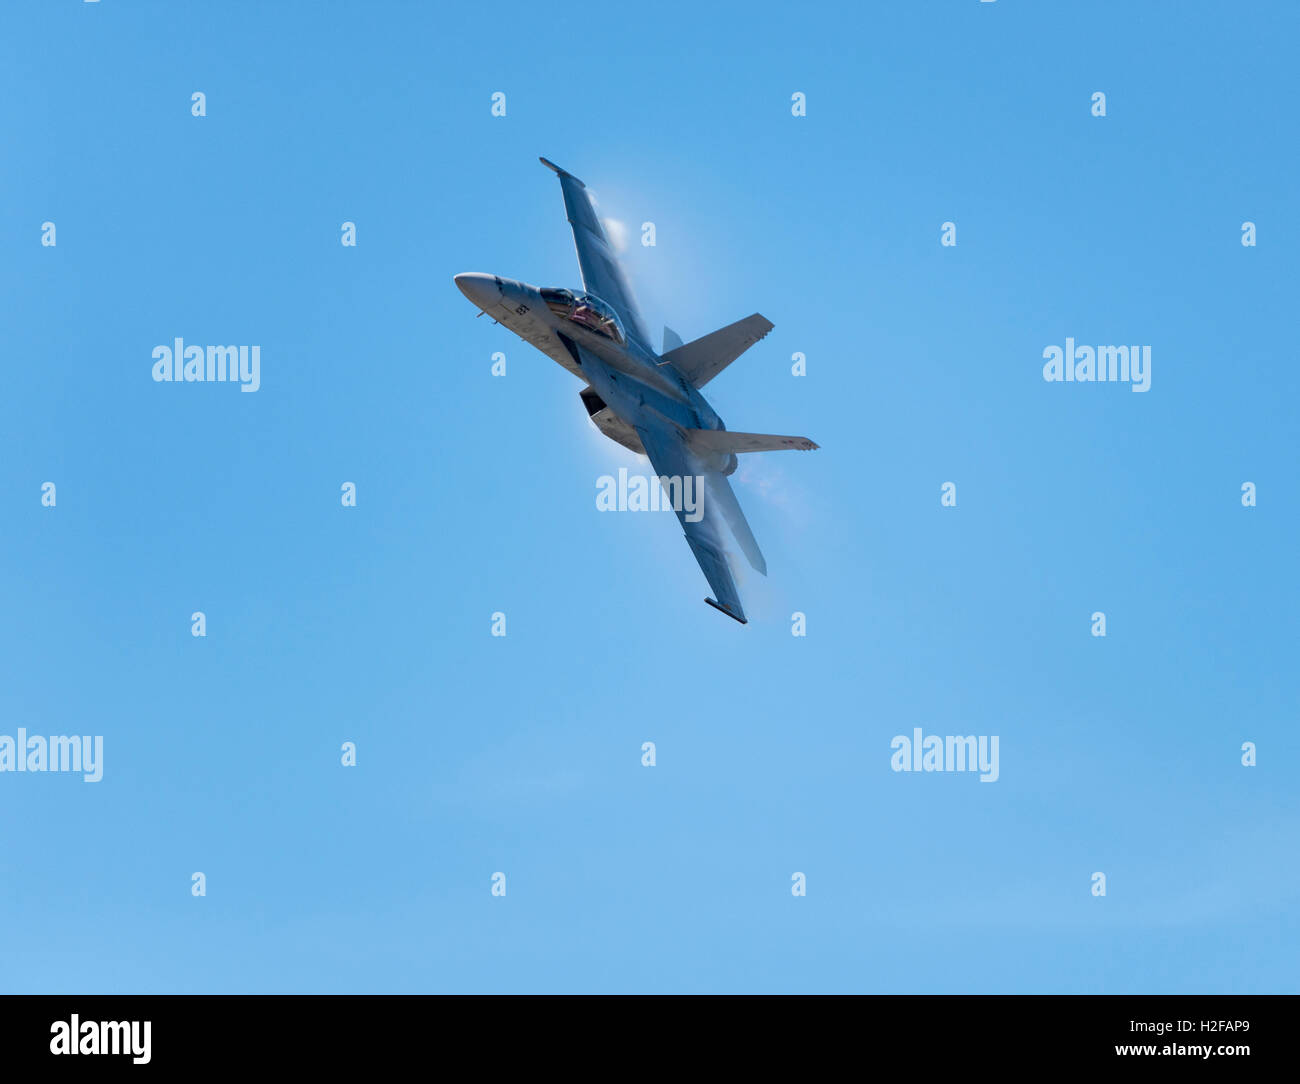 United States Navy F/A-18 Super Hornet military fighter jet. military fighter jet. Stock Photo